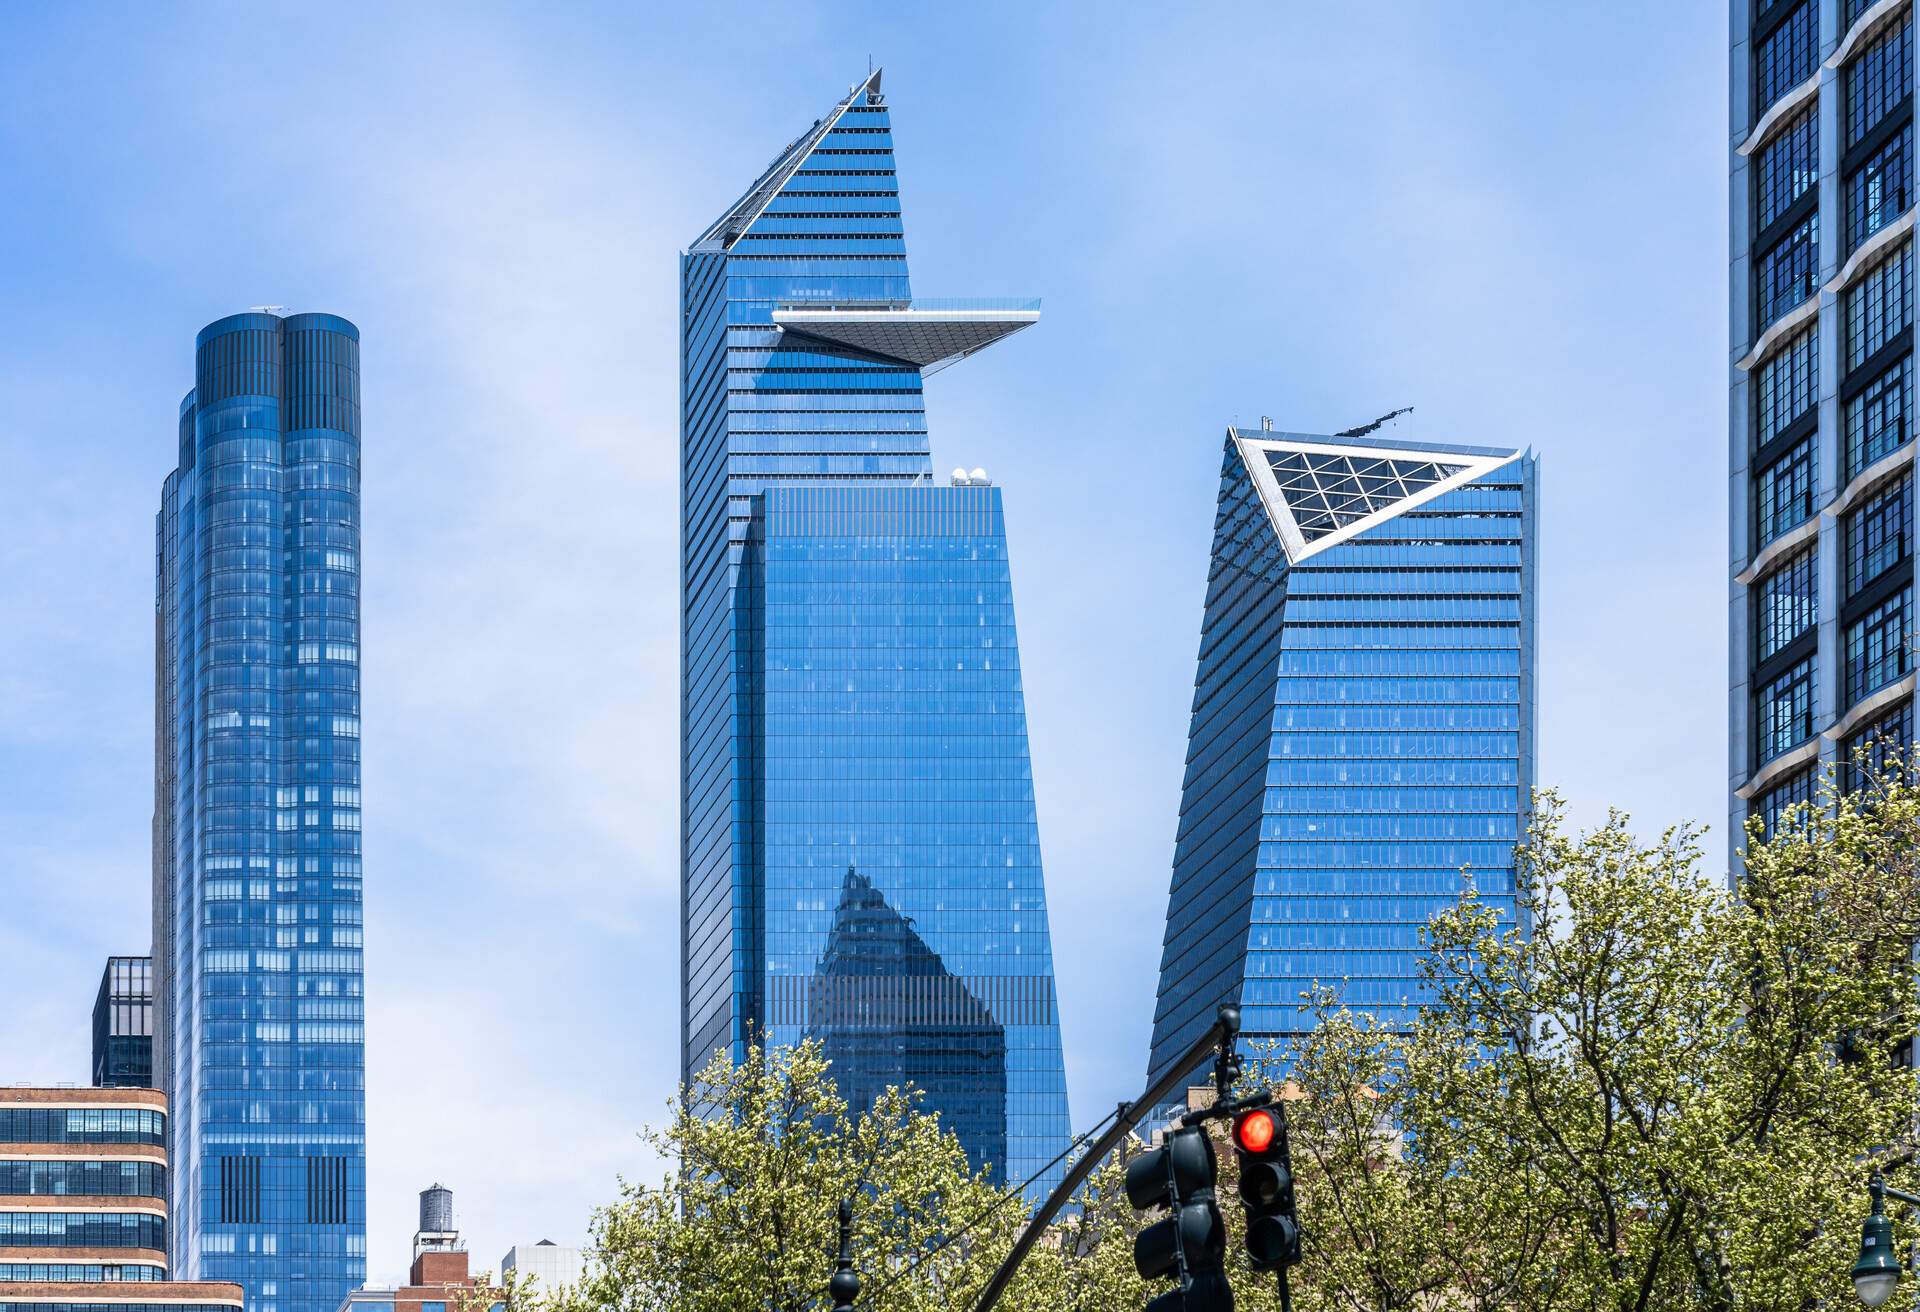 This view from Hudson River Park near Chelsea Piers looks north toward Hudson Yards in New York. Hudson Yards is a multi building development with commercial, residential and retail occupancy. Seen here are 15, 30 and 10 Hudson Yards, a luxury residential tower and two office towers.